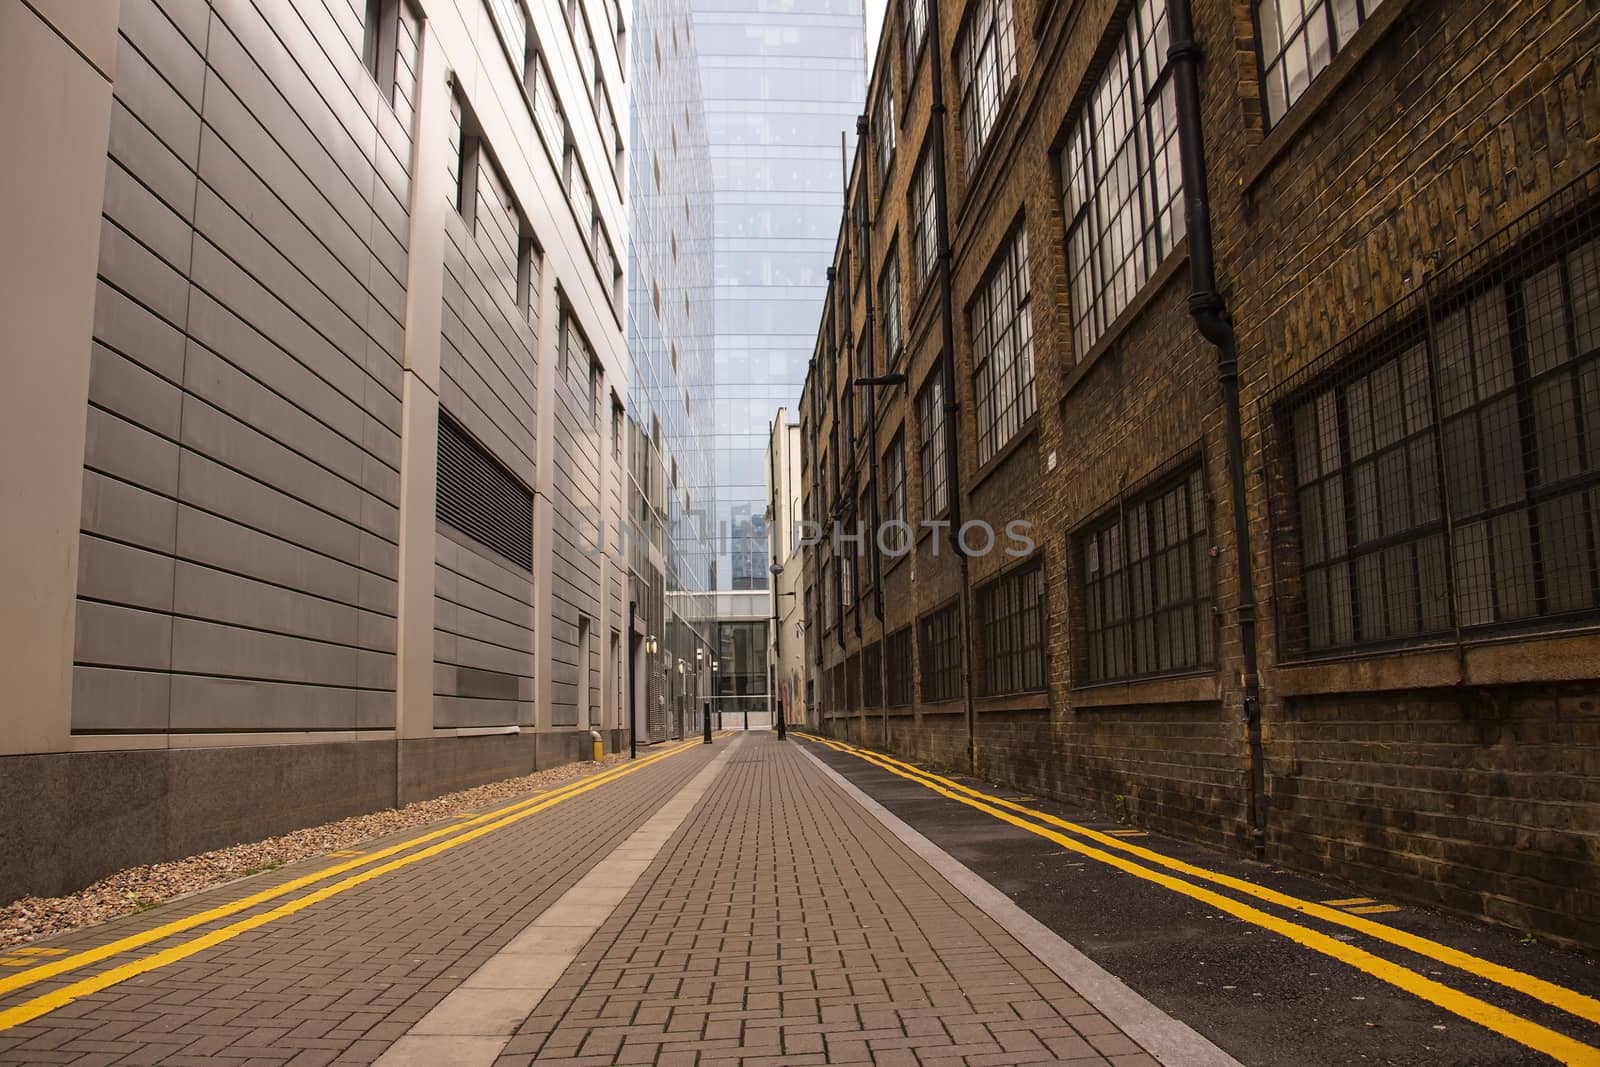 Lonely london alley front by Wow_Dan